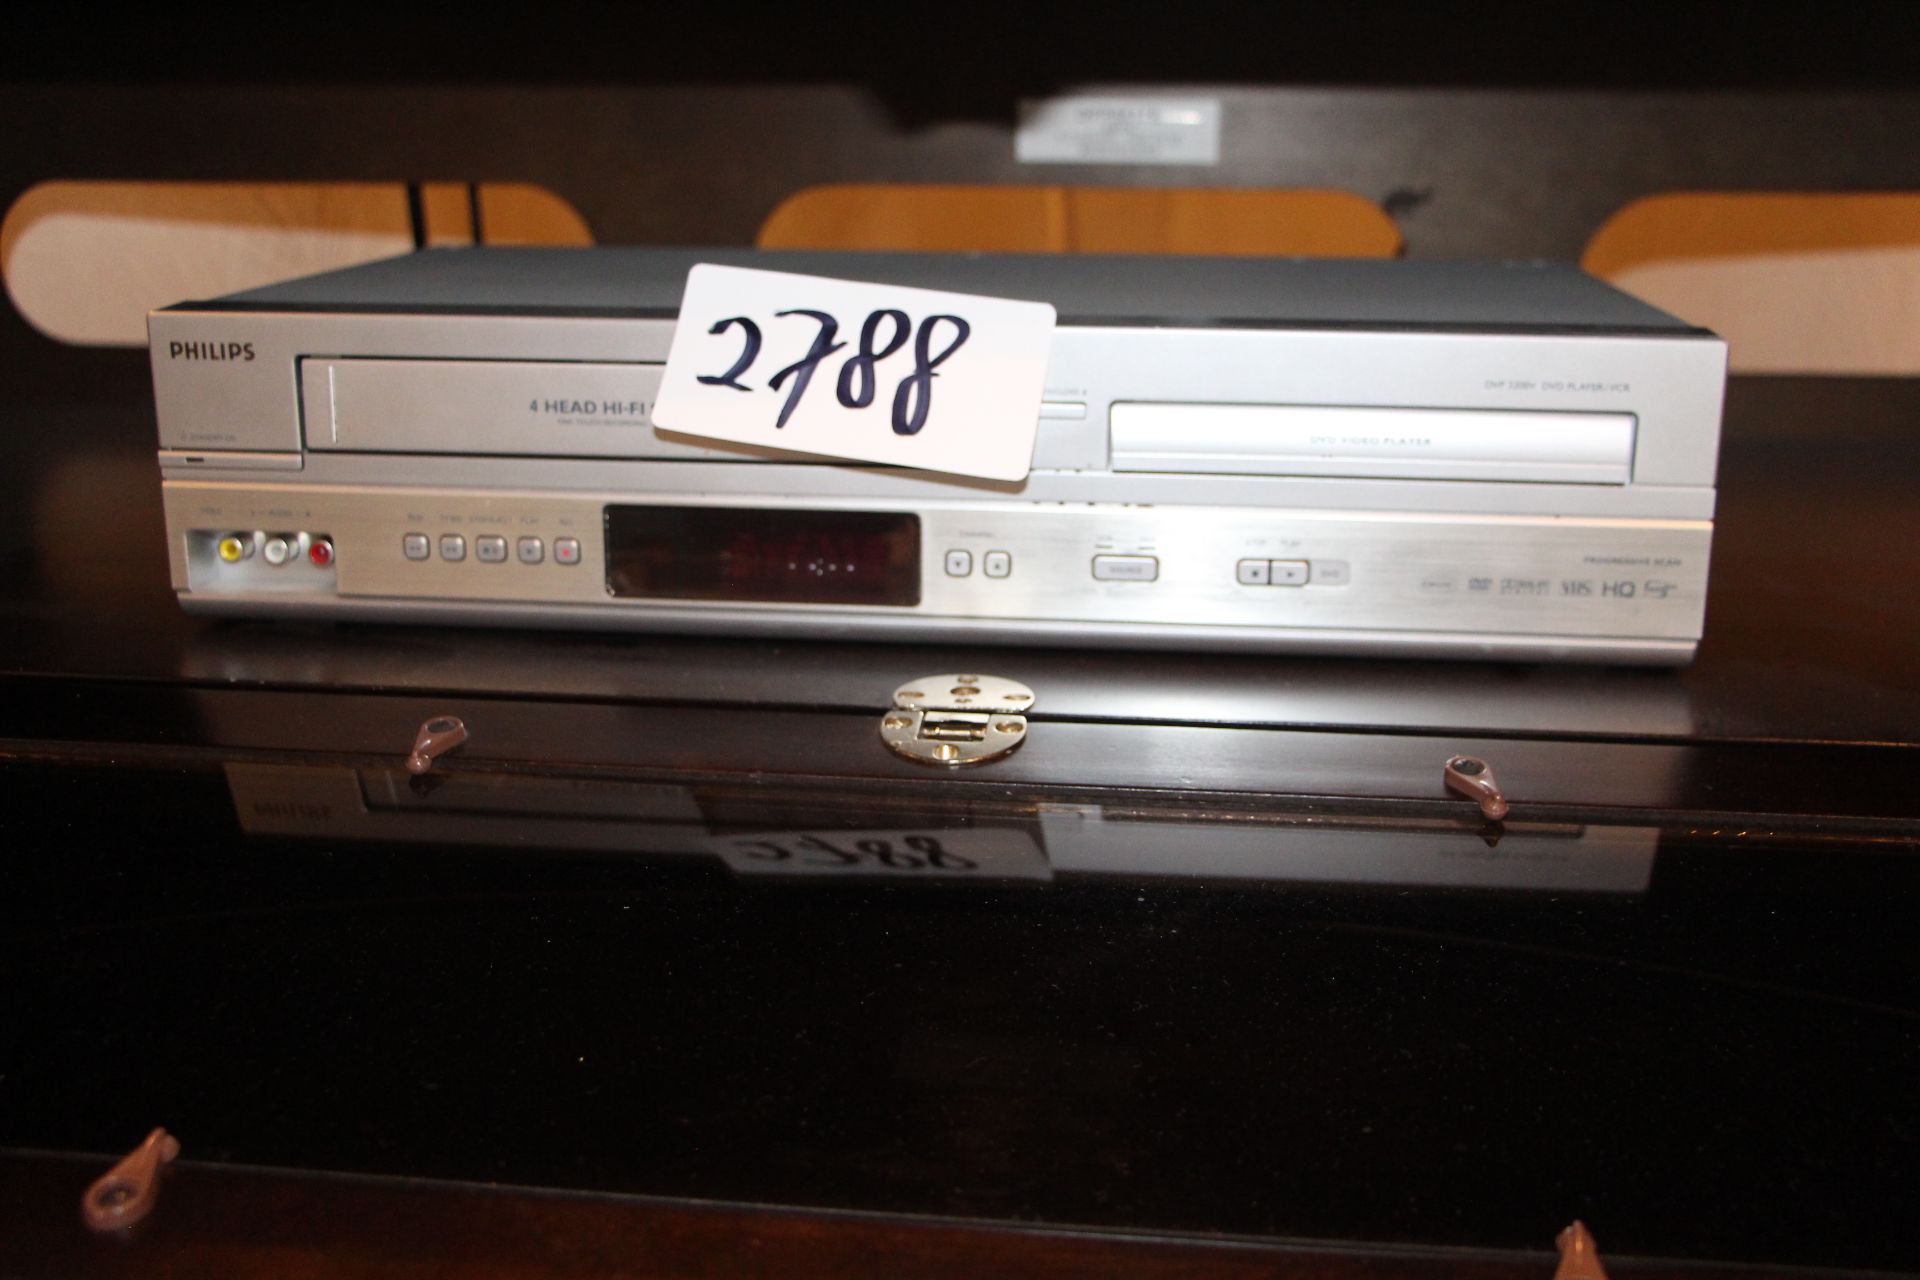 Philips VCR /DVD combo player